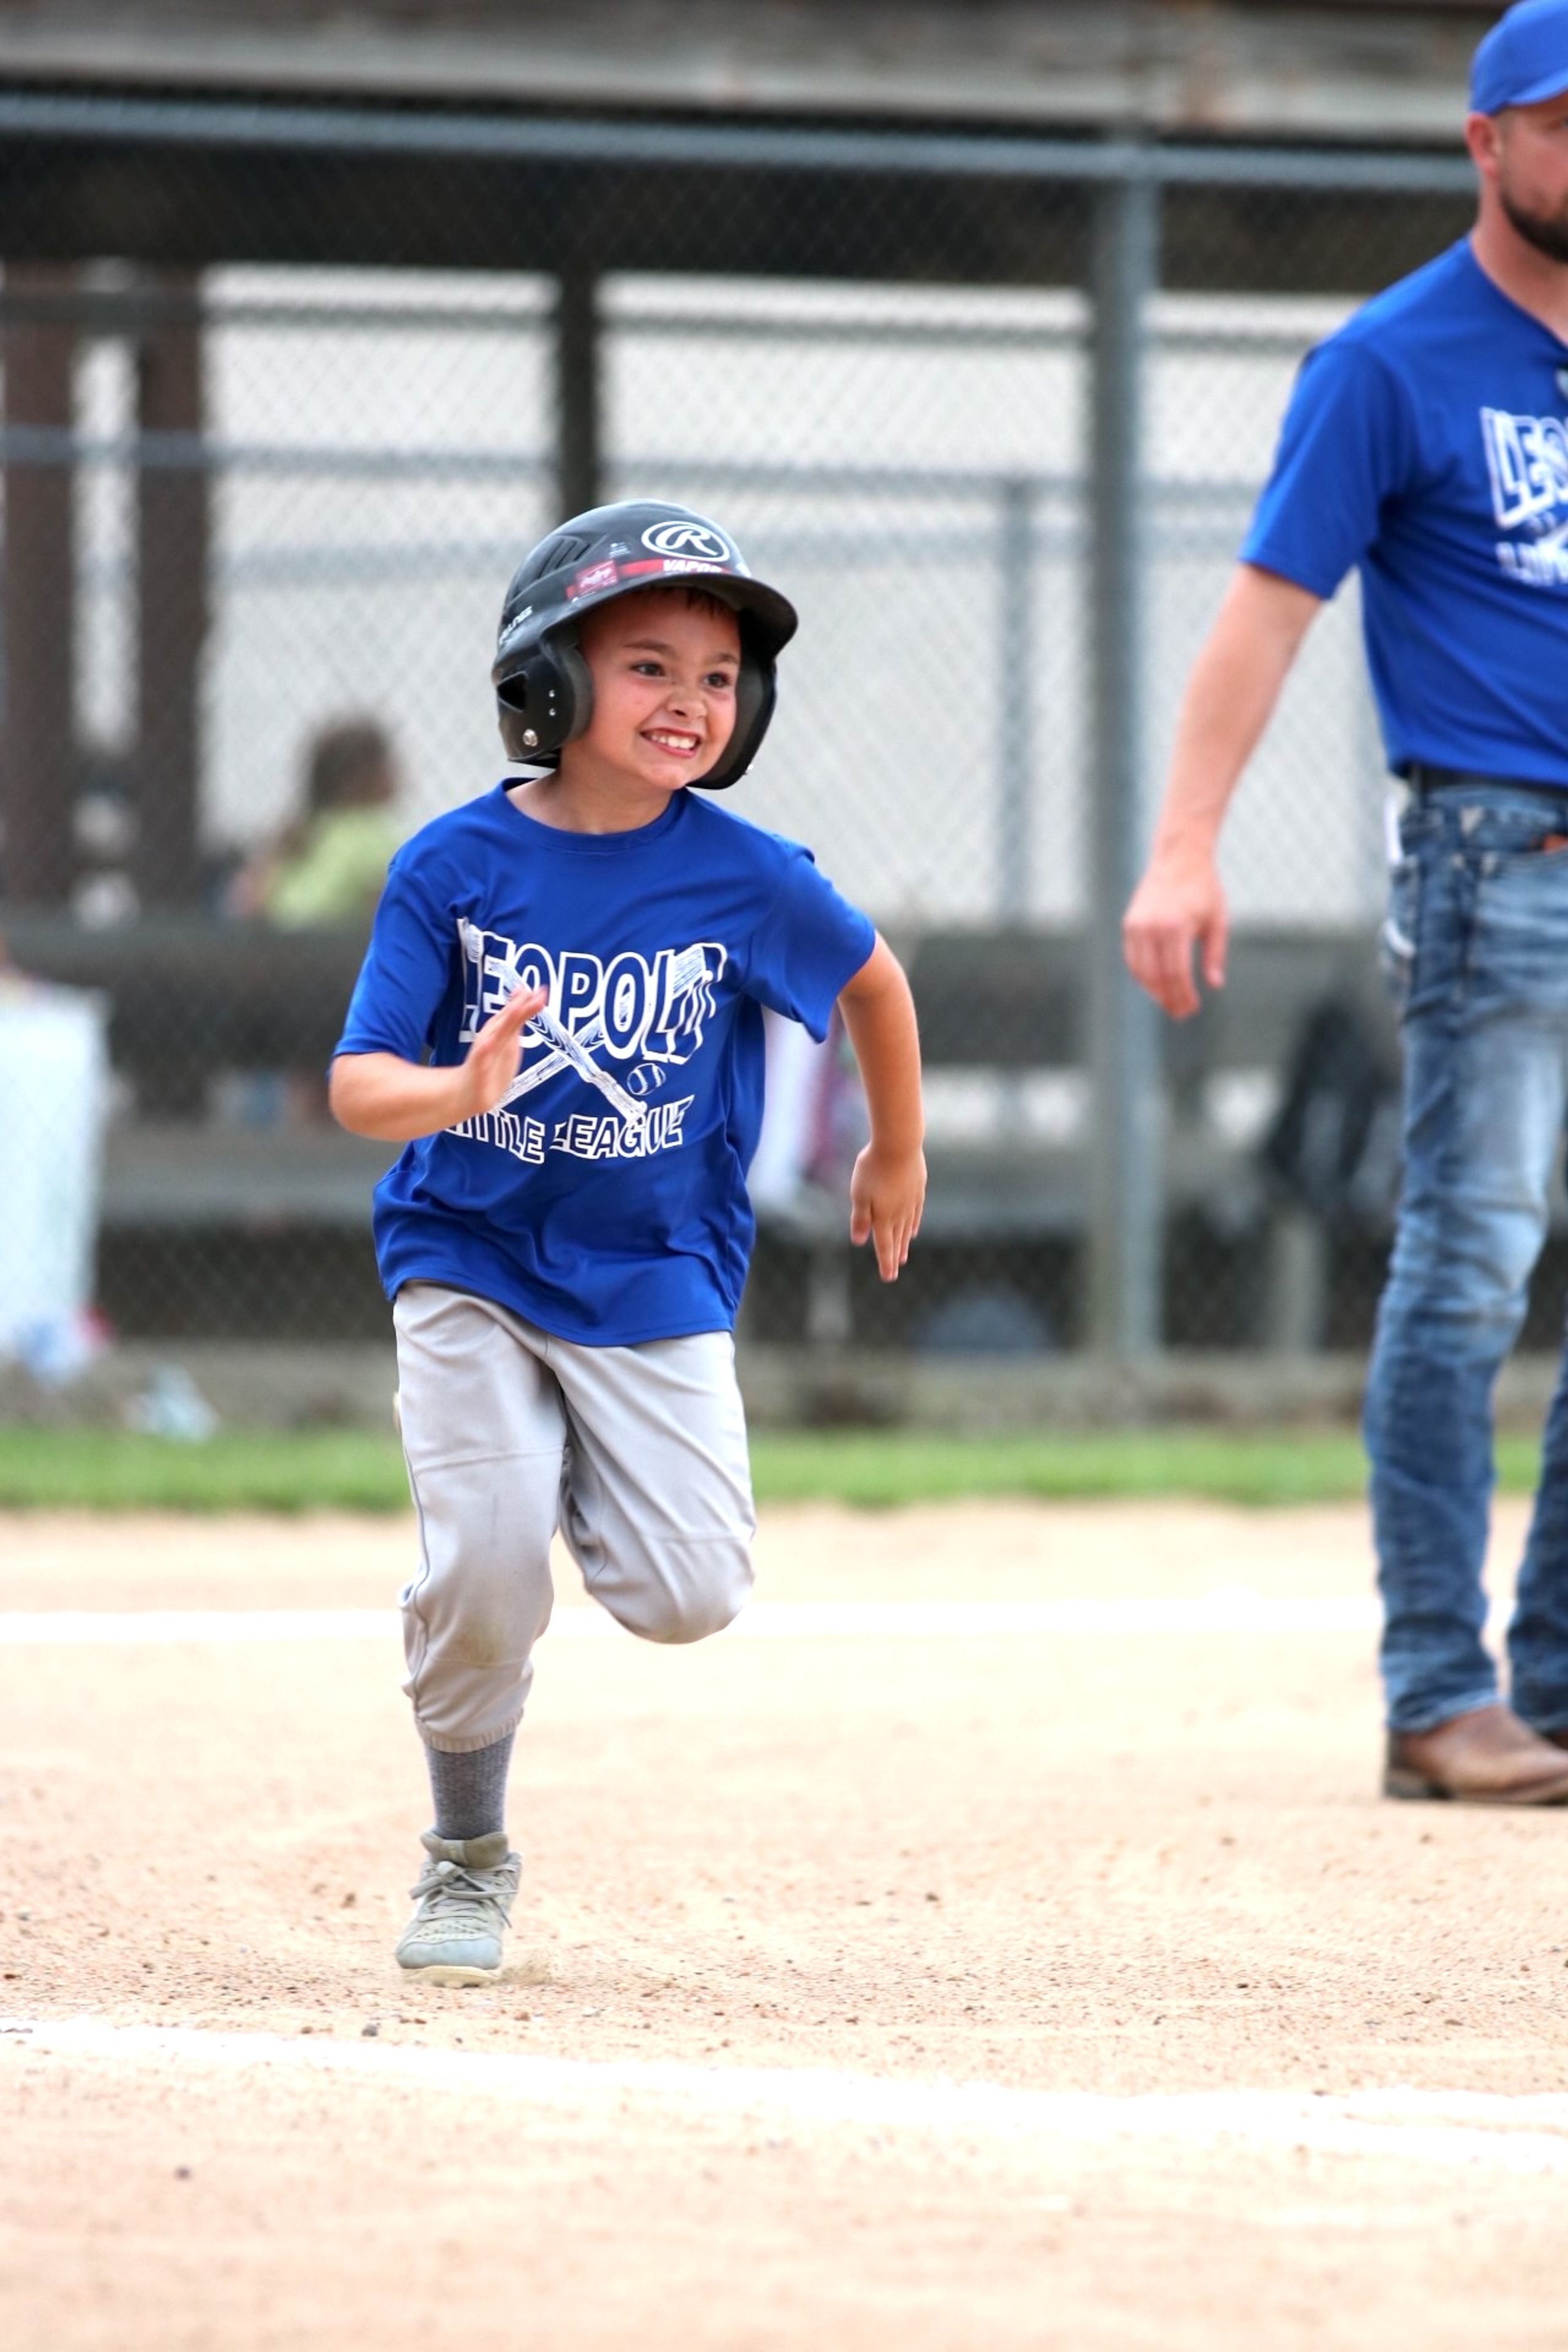 
Cam Hutchings runs quickly to first, attempting to avoid a force out during the 8U baseball game.